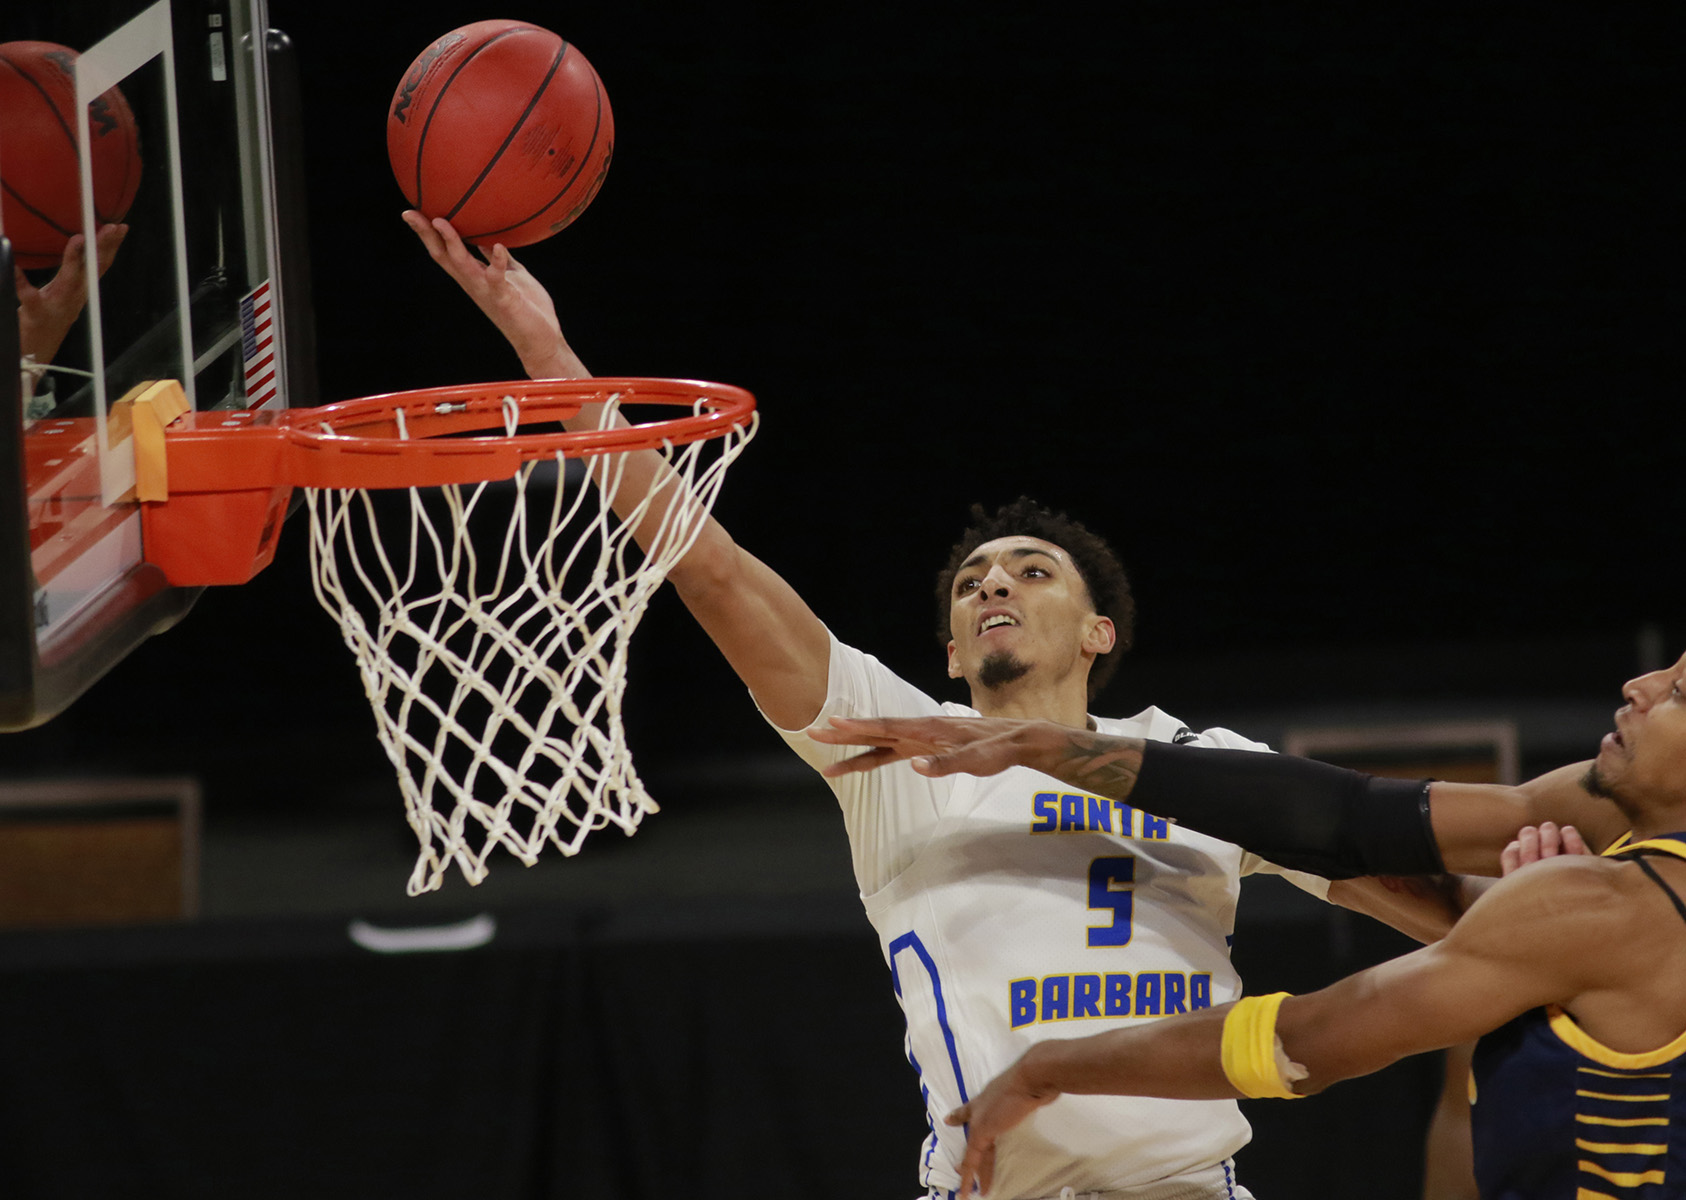 UC Santa Barbara’s Miles Norris (5) goes for a shot past UC Irvine’s Austin Johnson (13) during the second half of an NCAA college basketball game for the championship of the Big West Conference men’s tournament.